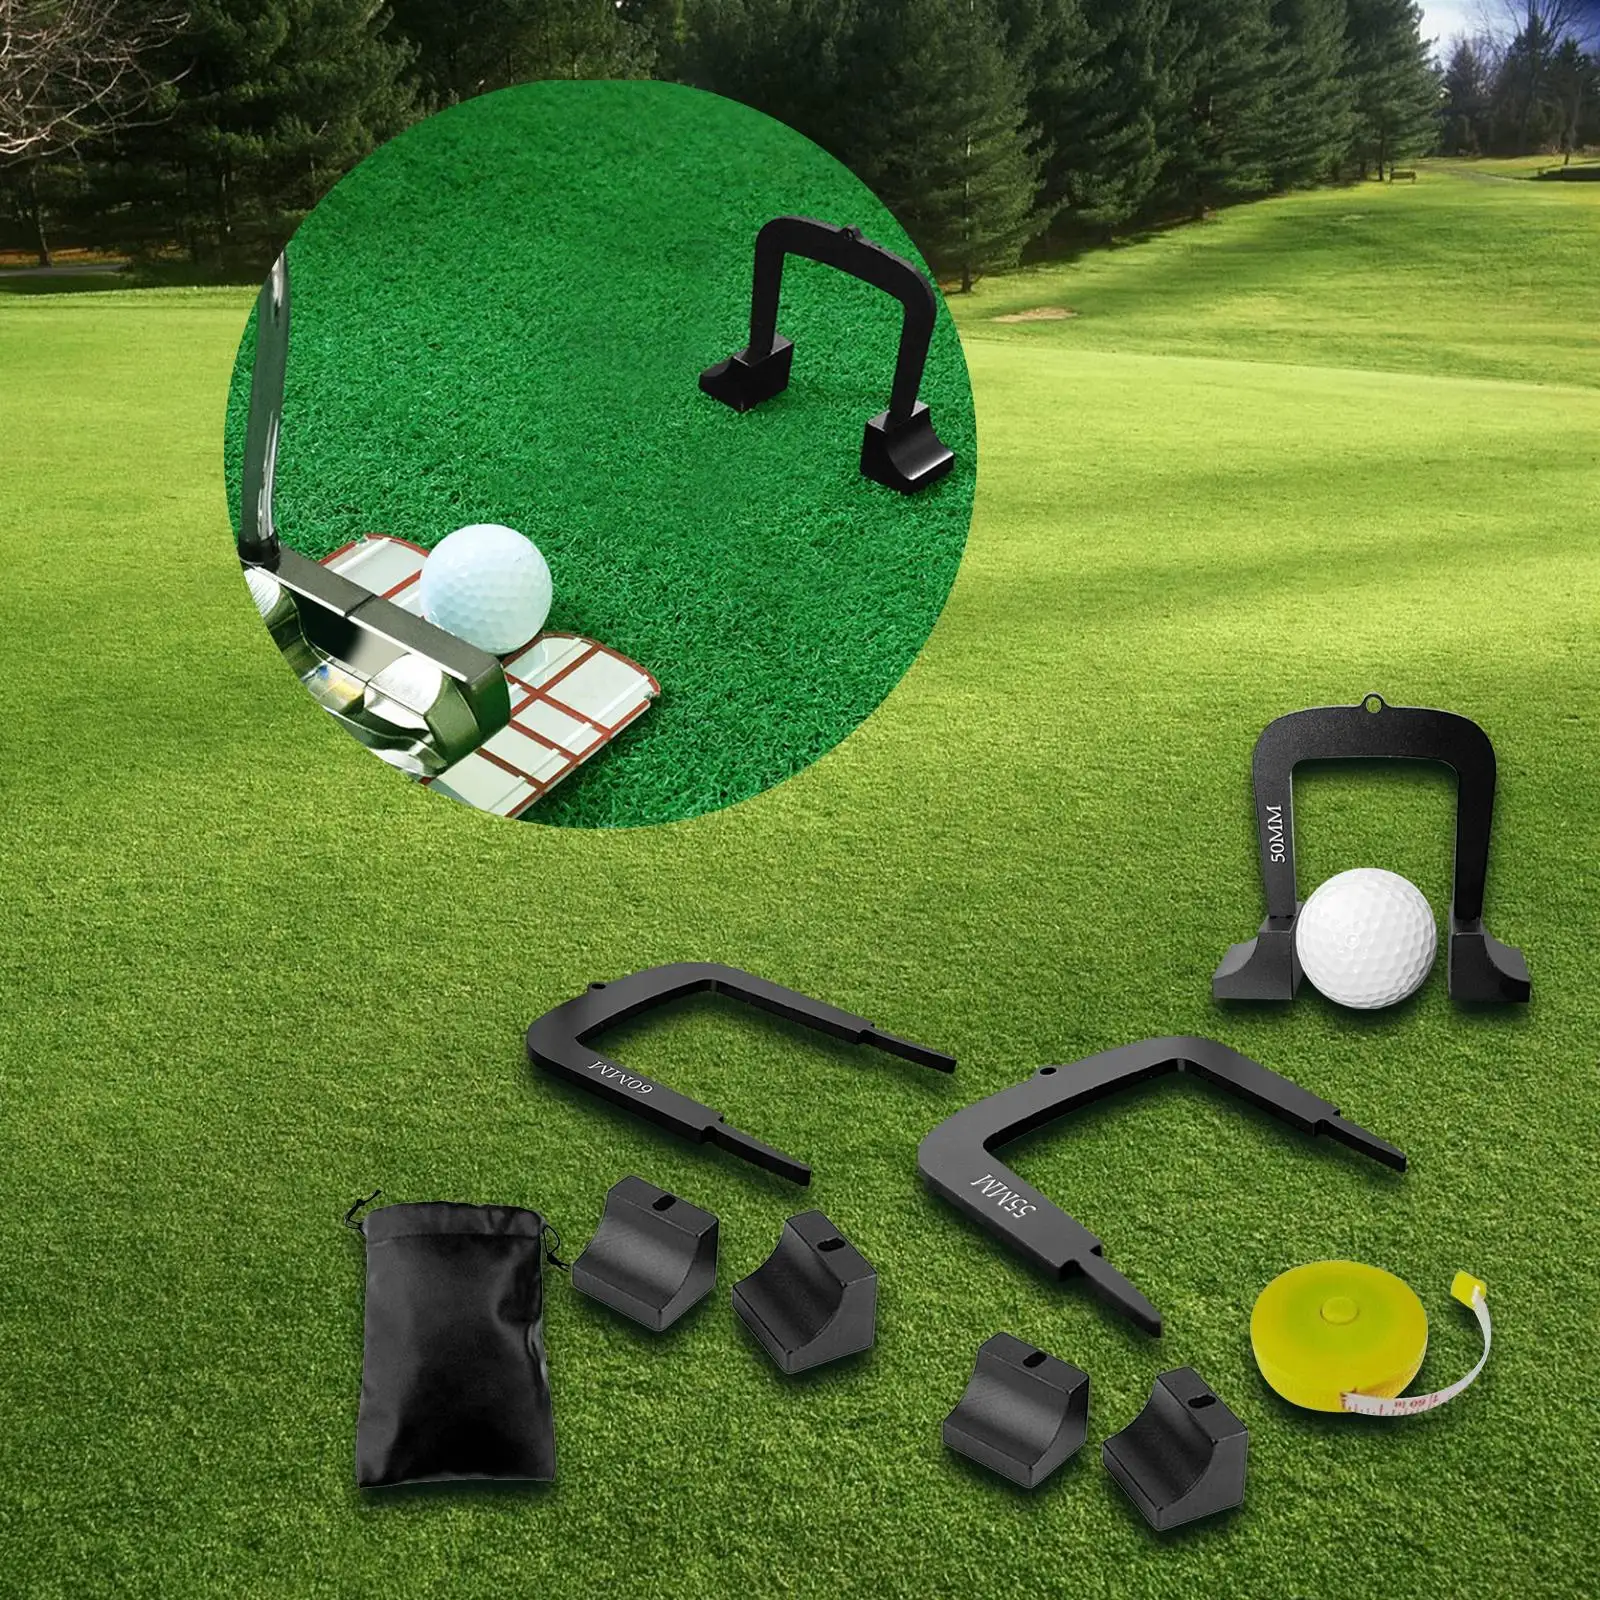 3x Golf Putting Gates Metal Golf Training Equipment with A Ball Differently